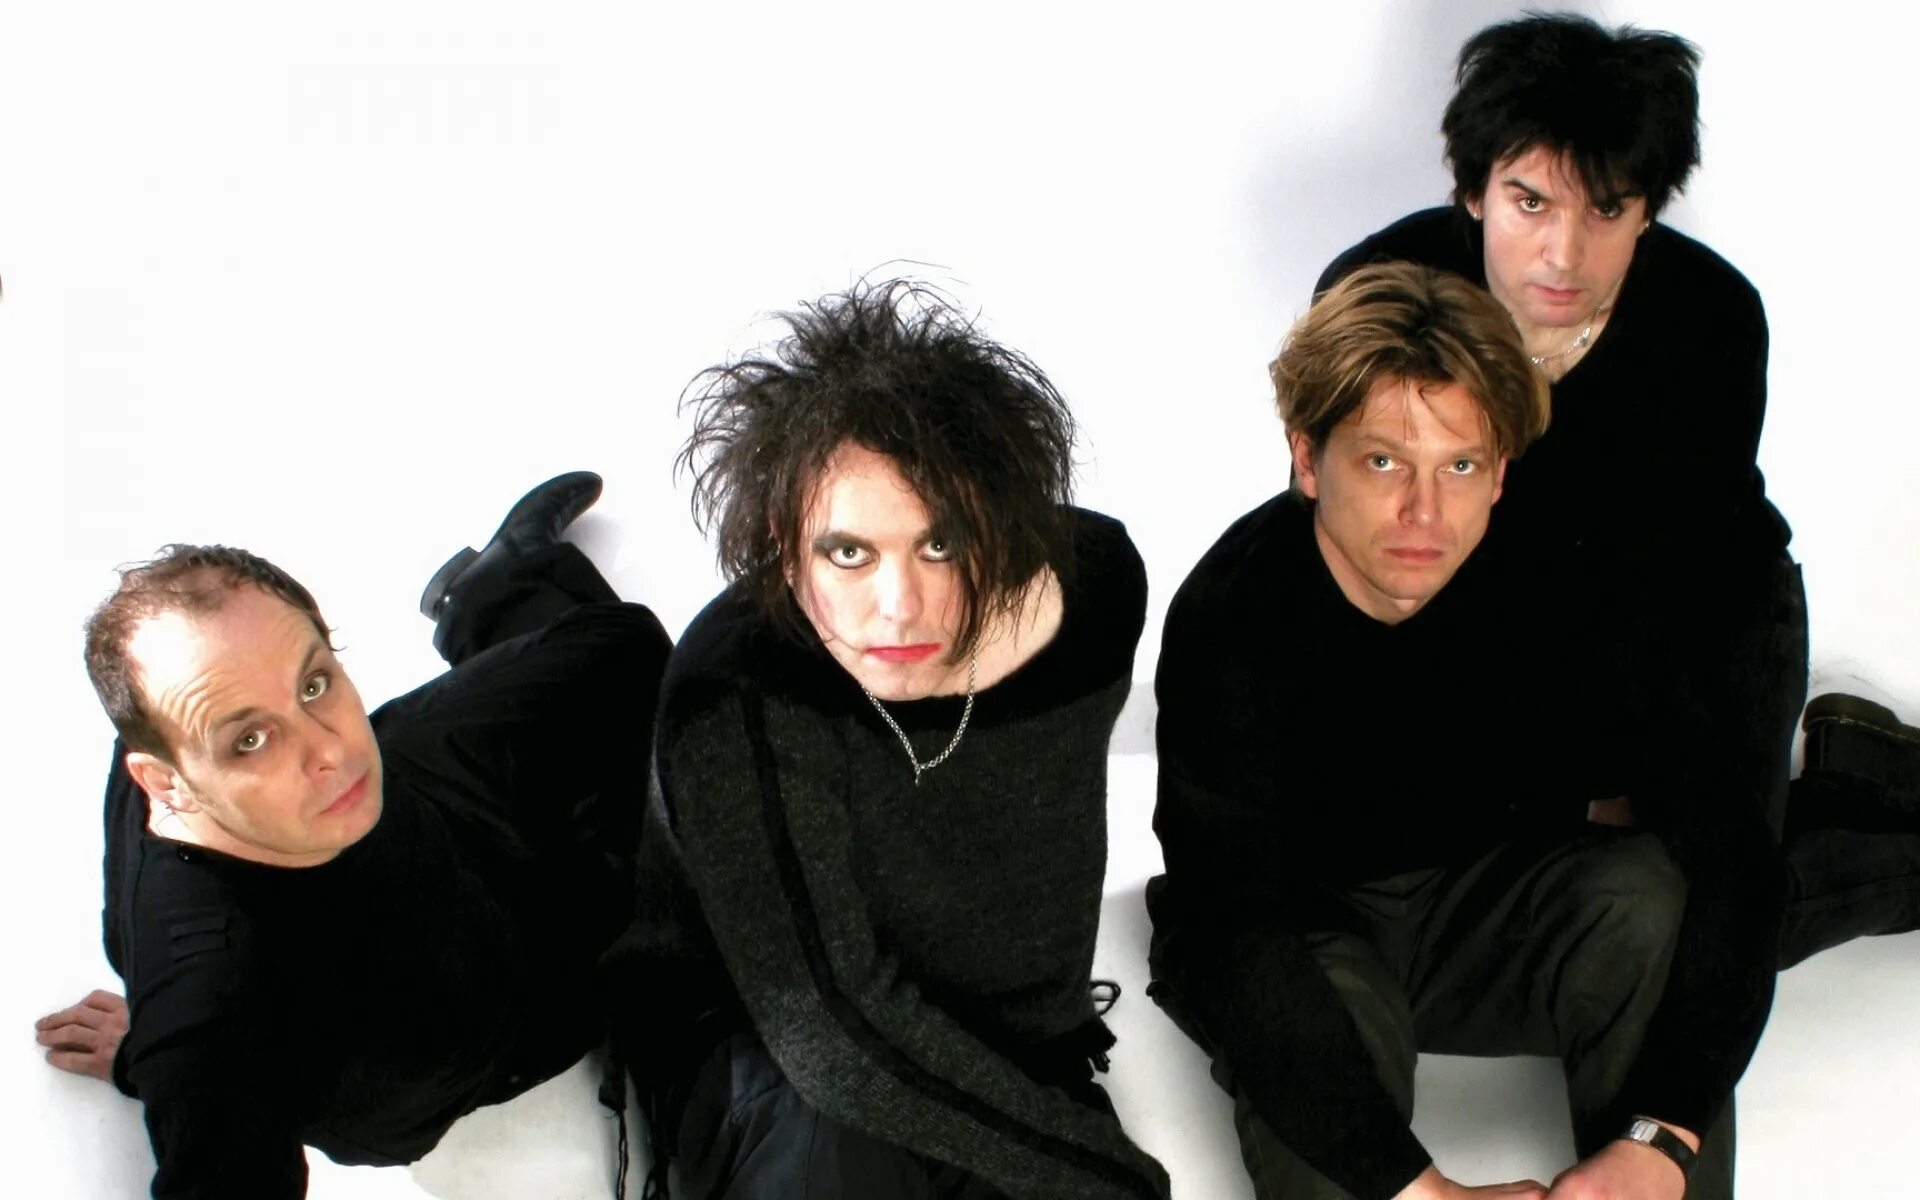 The cure forest. Группа Кьюр. The Cure Band. The Cure 80s. The Cure 2008.